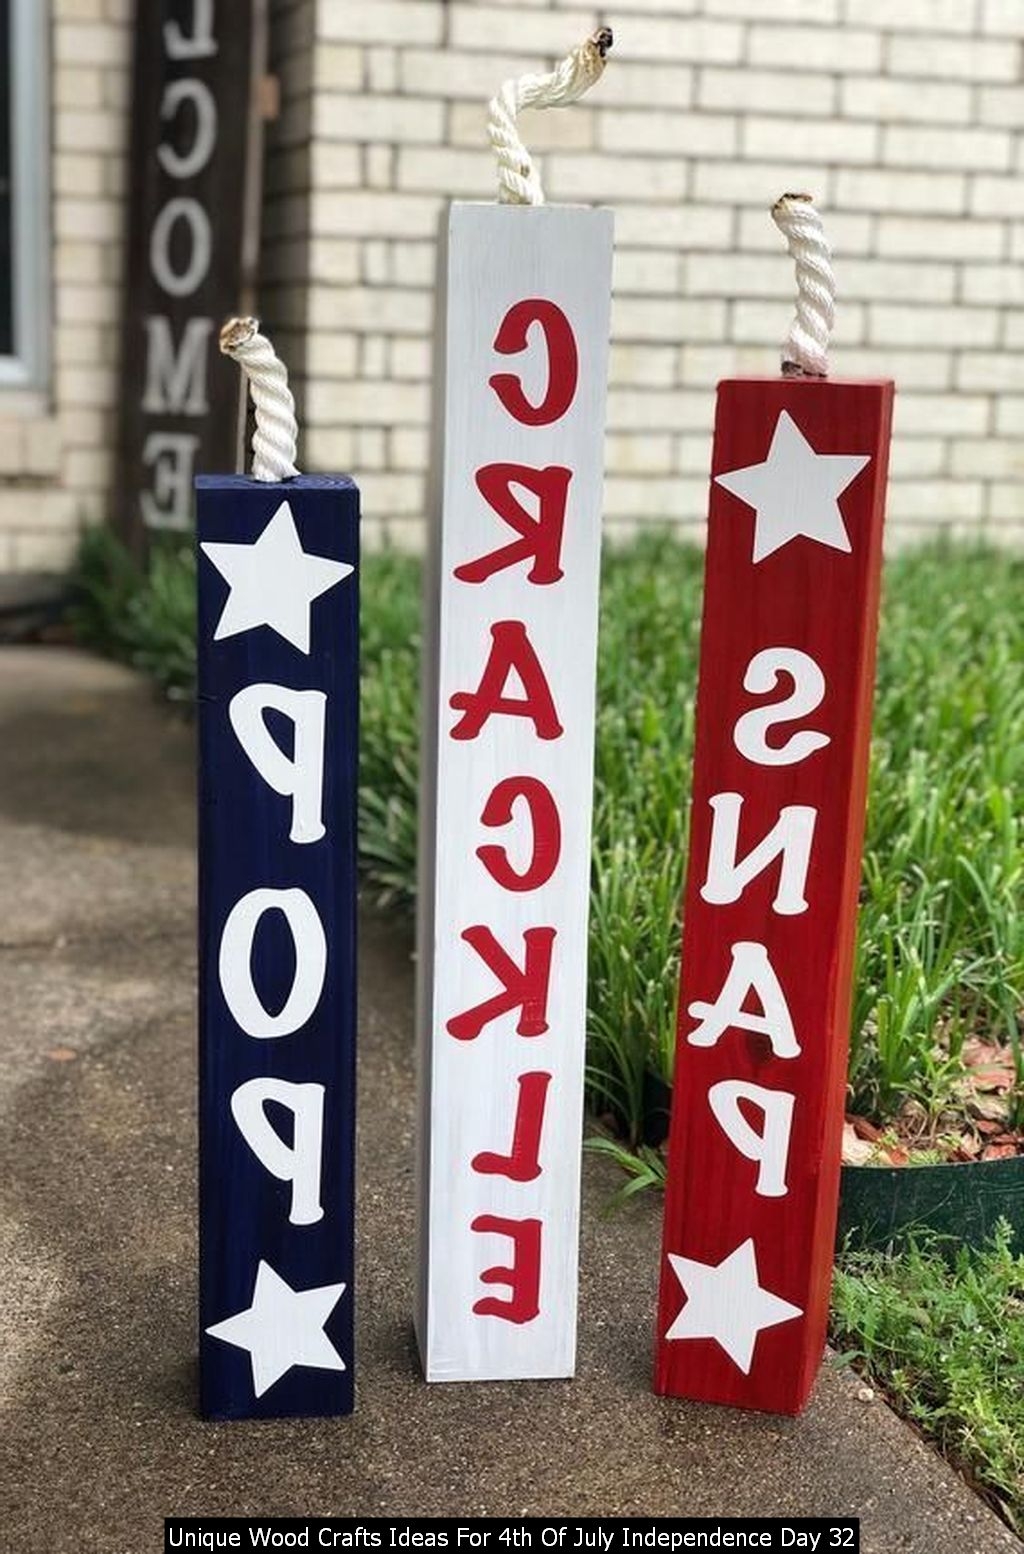 Unique Wood Crafts Ideas For 4th Of July Independence Day 32